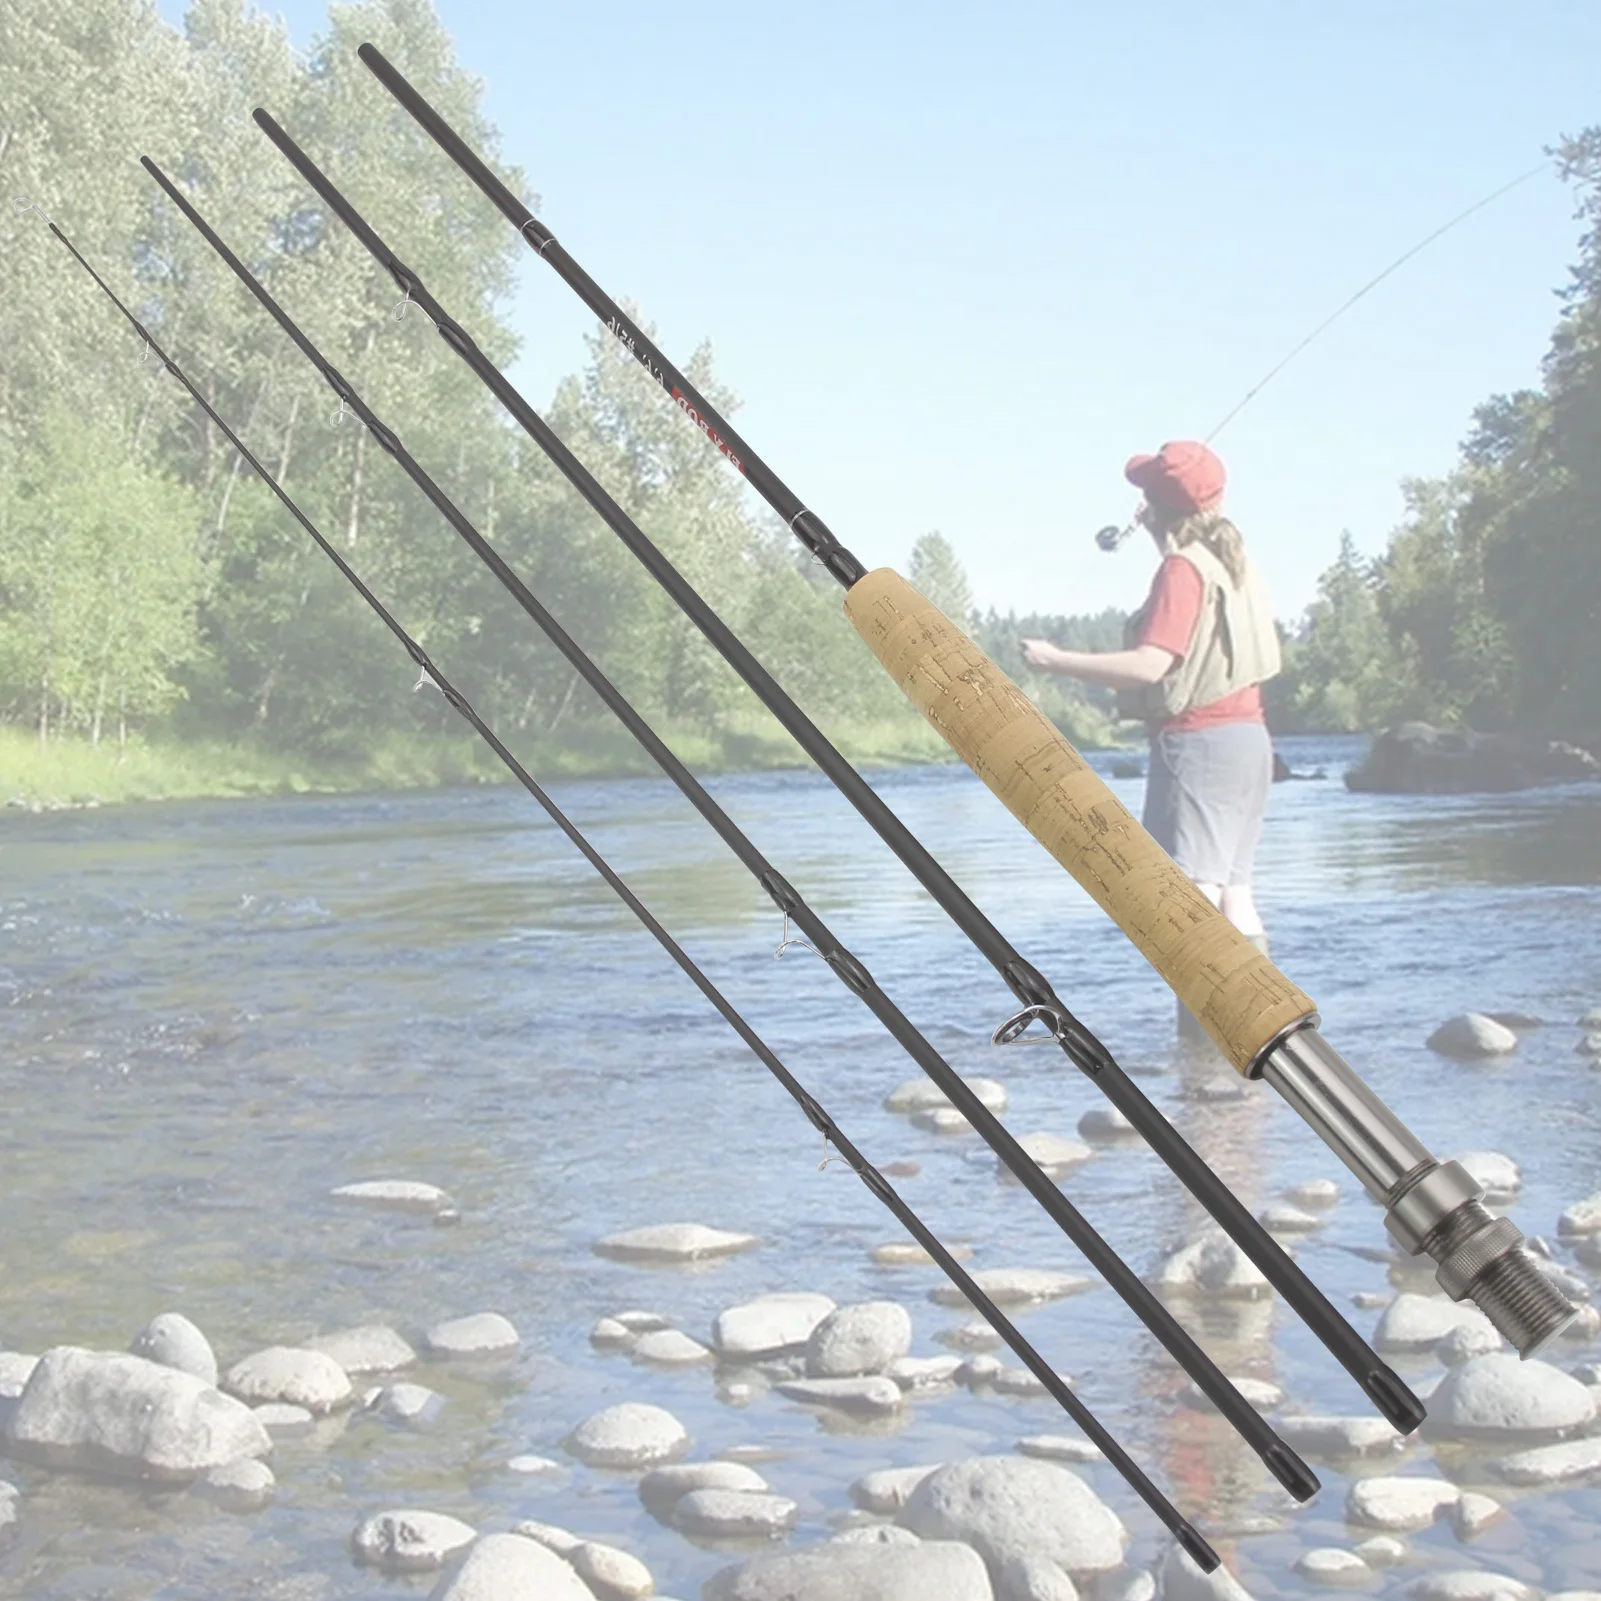 https://ae01.alicdn.com/kf/Sd60ac5ccd38b43fbb32ca73e43995468f/NEW-8ft-9ft-4-Section-Fly-Fishing-Rod-Portable-Carbon-UltraLight-Slow-Action-Fly-Rod-Cork.jpg